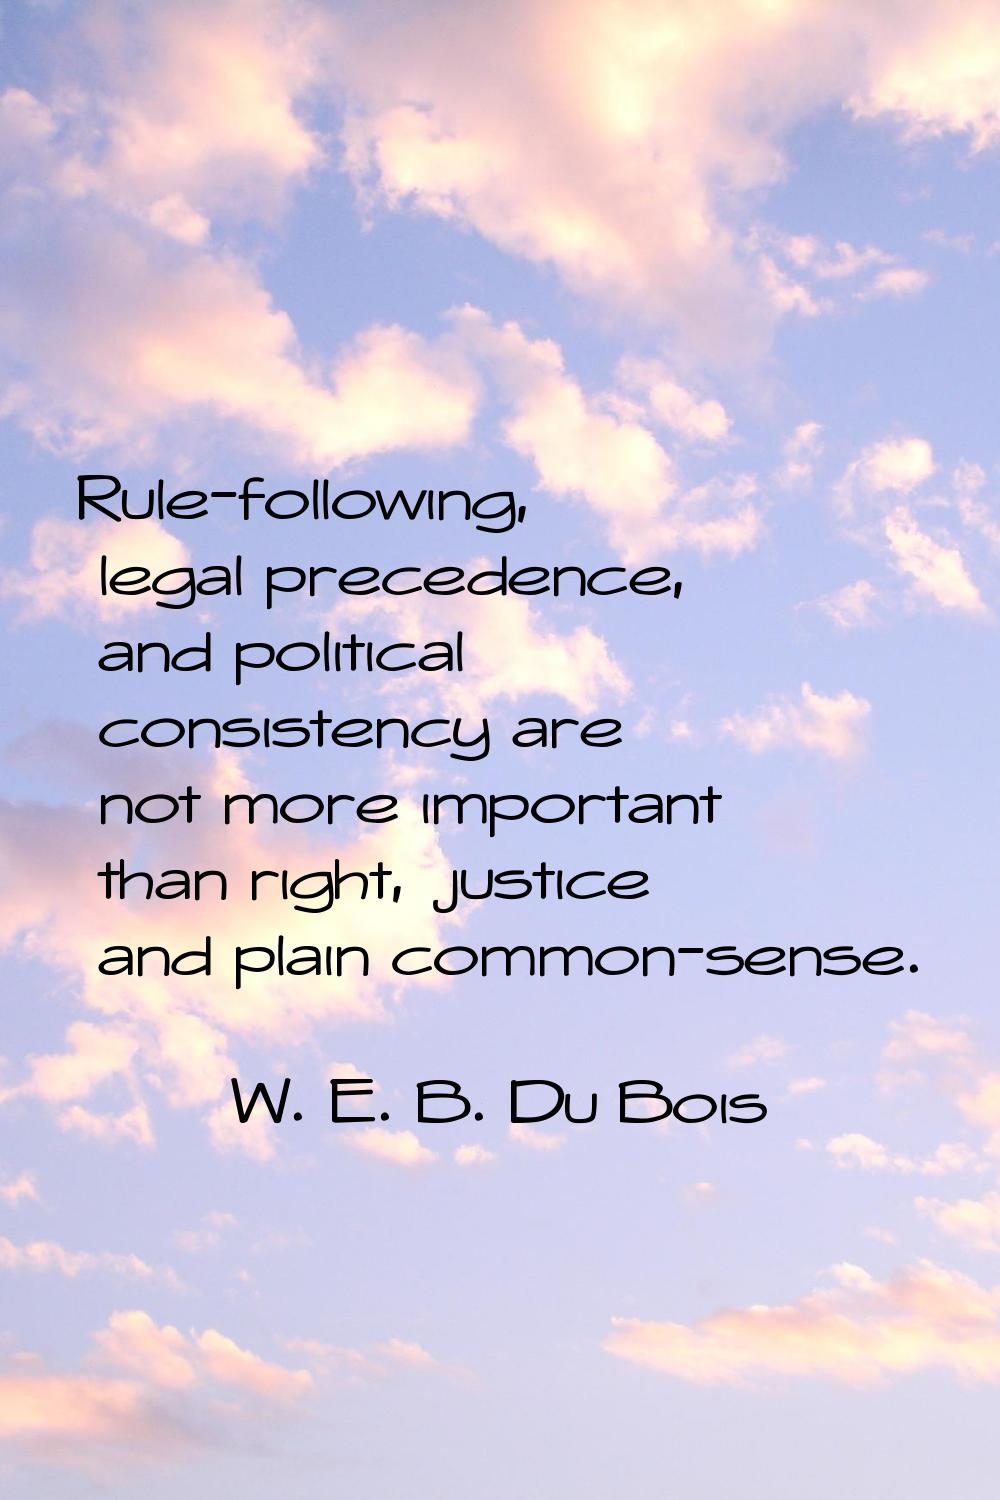 Rule-following, legal precedence, and political consistency are not more important than right, just